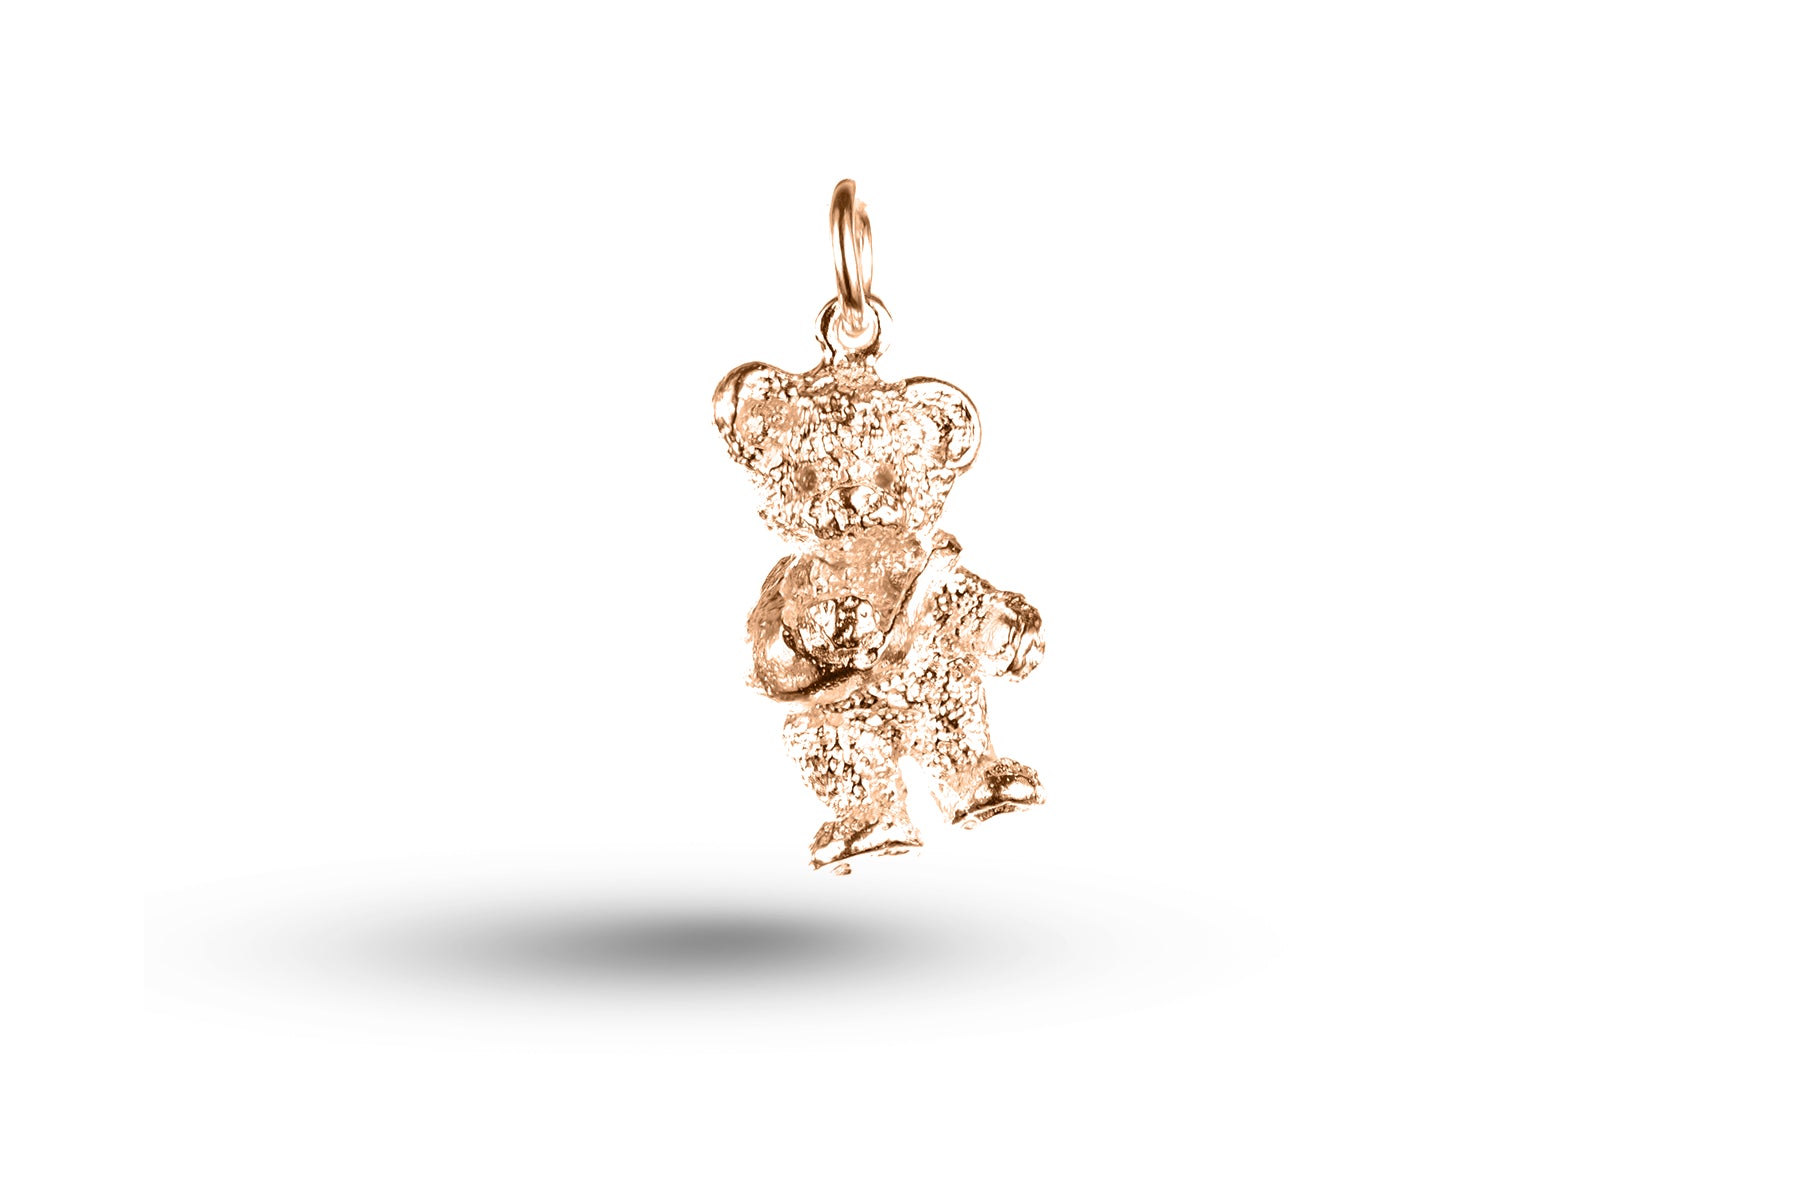 Rose gold Teddy with Arm in Sling charm.